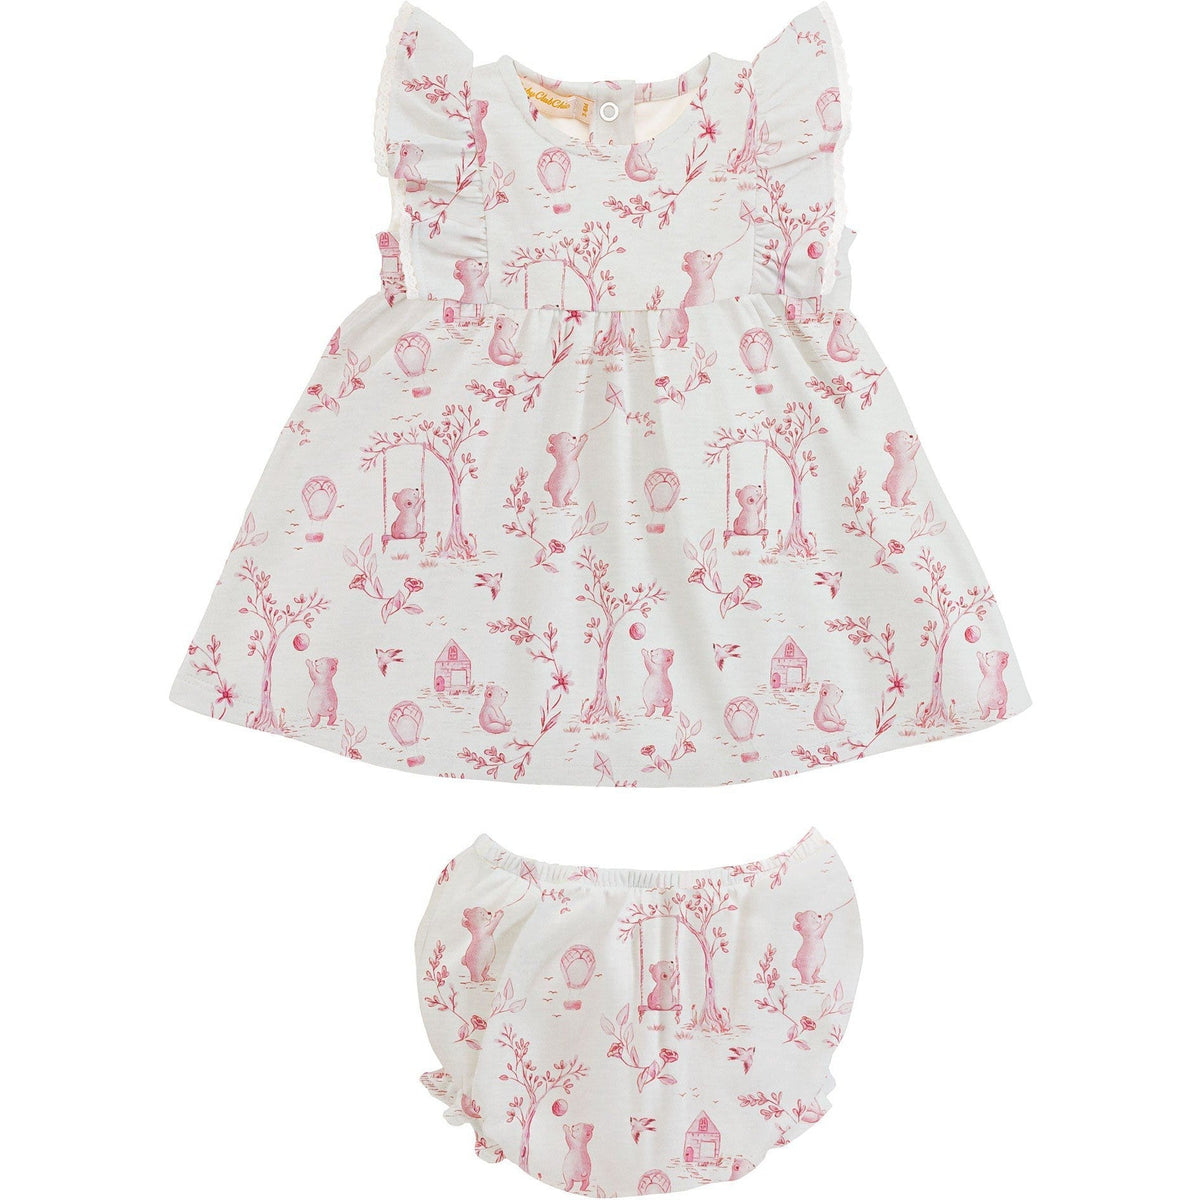 Baby Club Chic Toile De Jouy Pink Dress With Ruffle